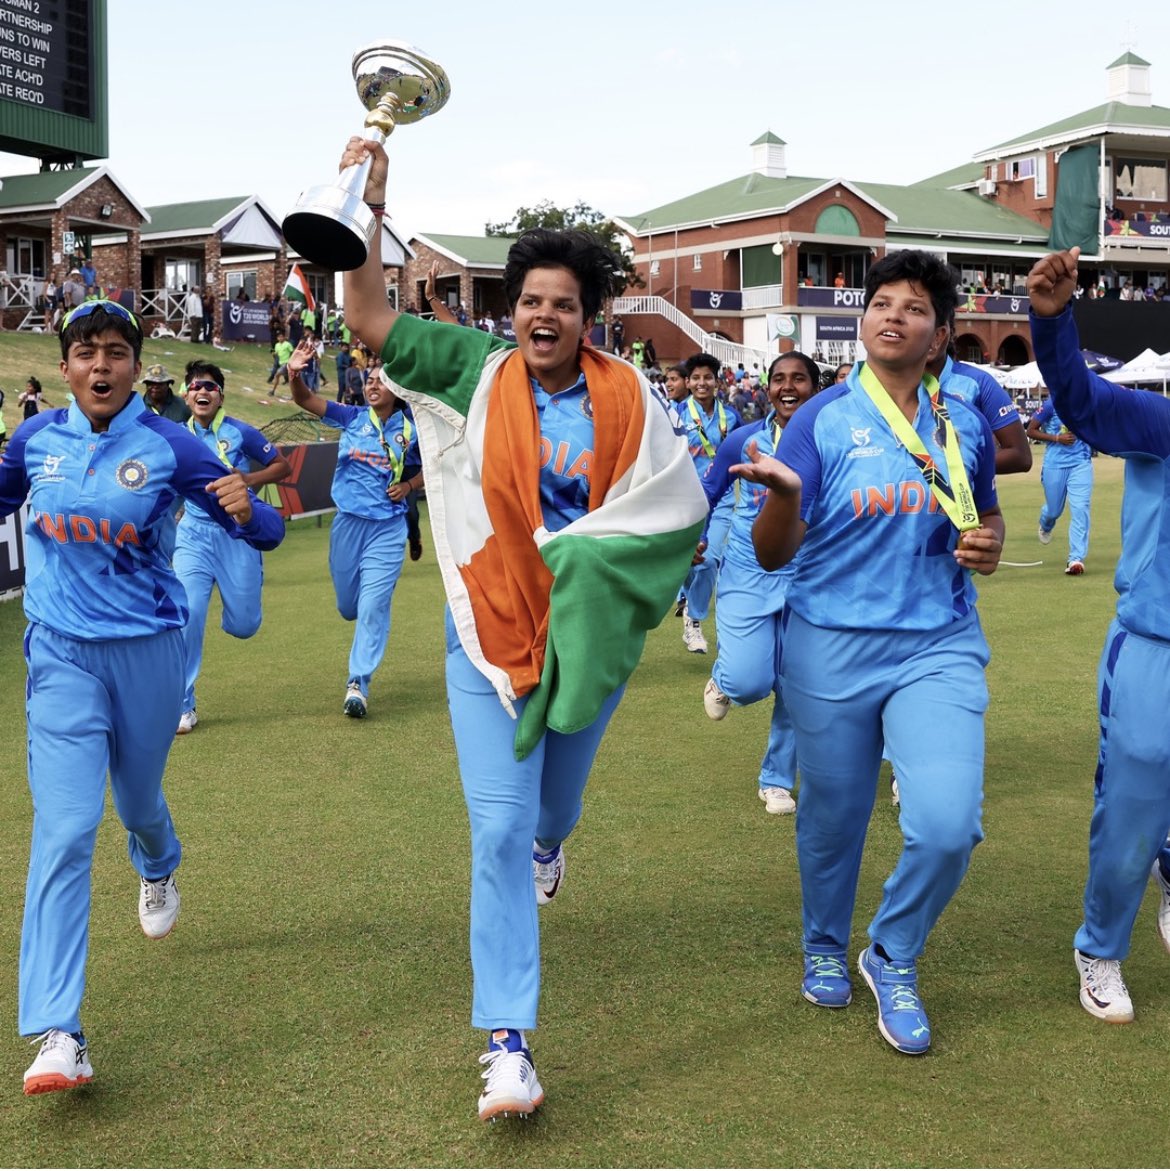 C.H.A.M.P.I.O.N.S 🏆 

Many congratulations to @TheShafaliVerma & team for creating history by winning the inaugural edition of #ICCU19WorldCup 🇮🇳 🇮🇳 
Indian women #cricket on the rise.